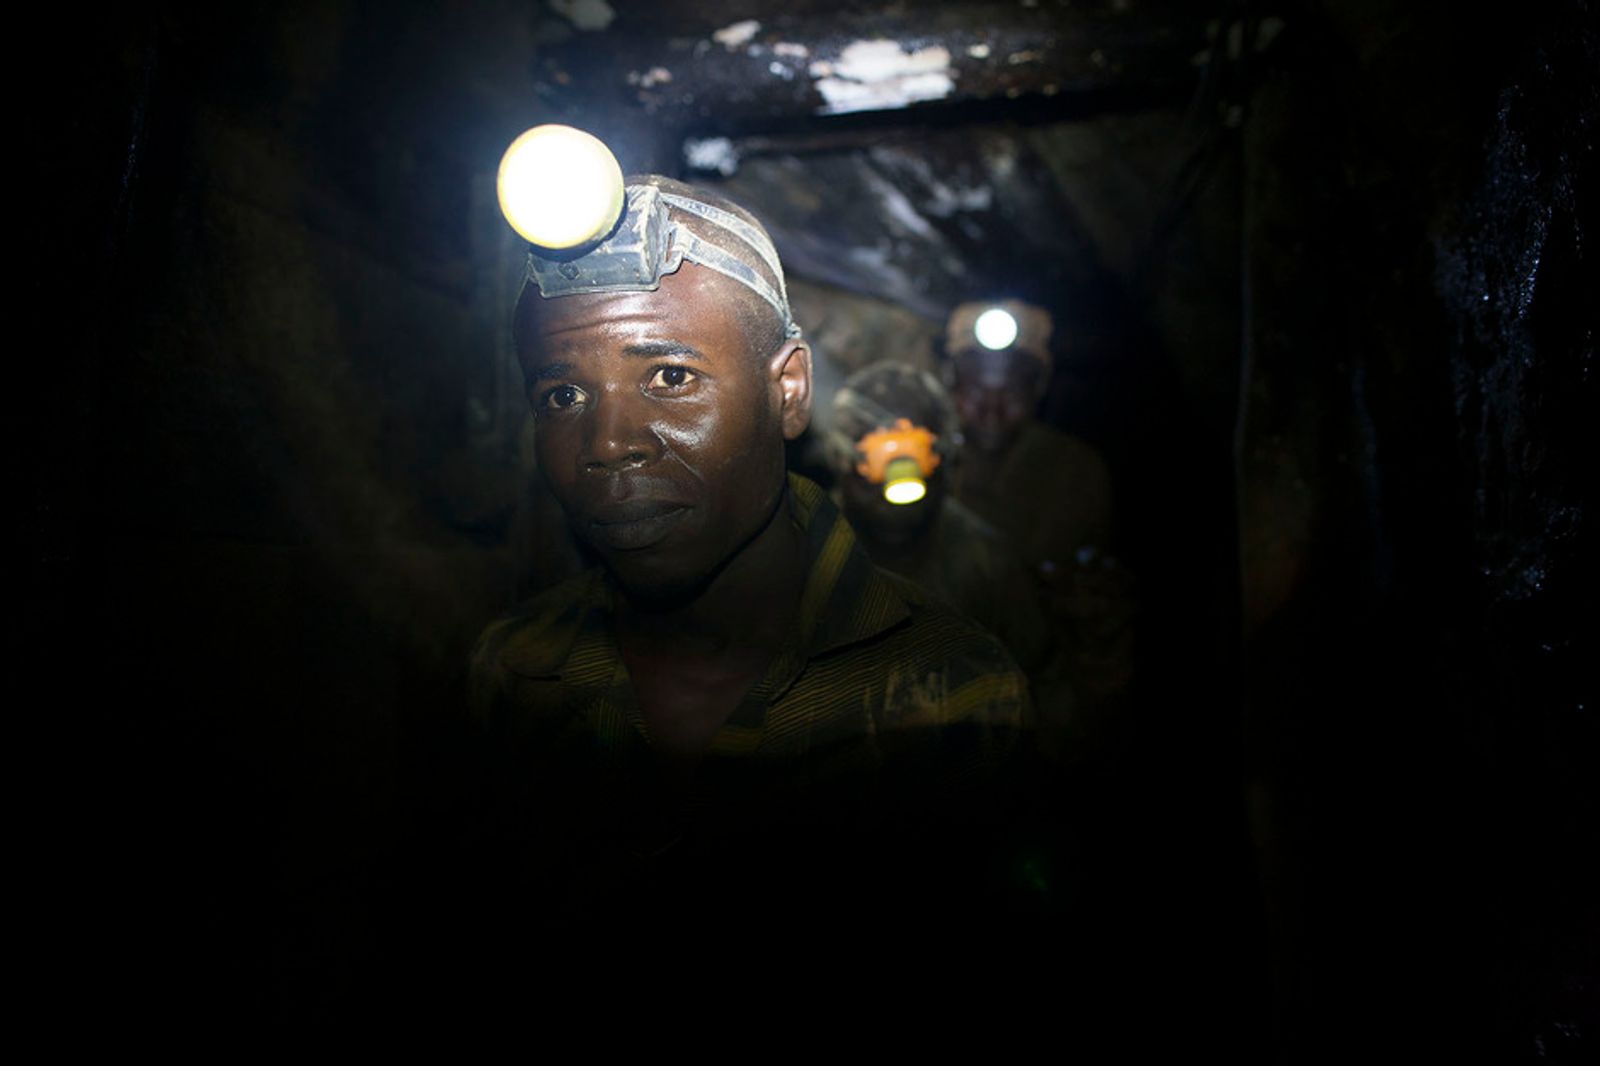 © Toby Binder - Image from the conflict-free mining in Eastern Congo photography project